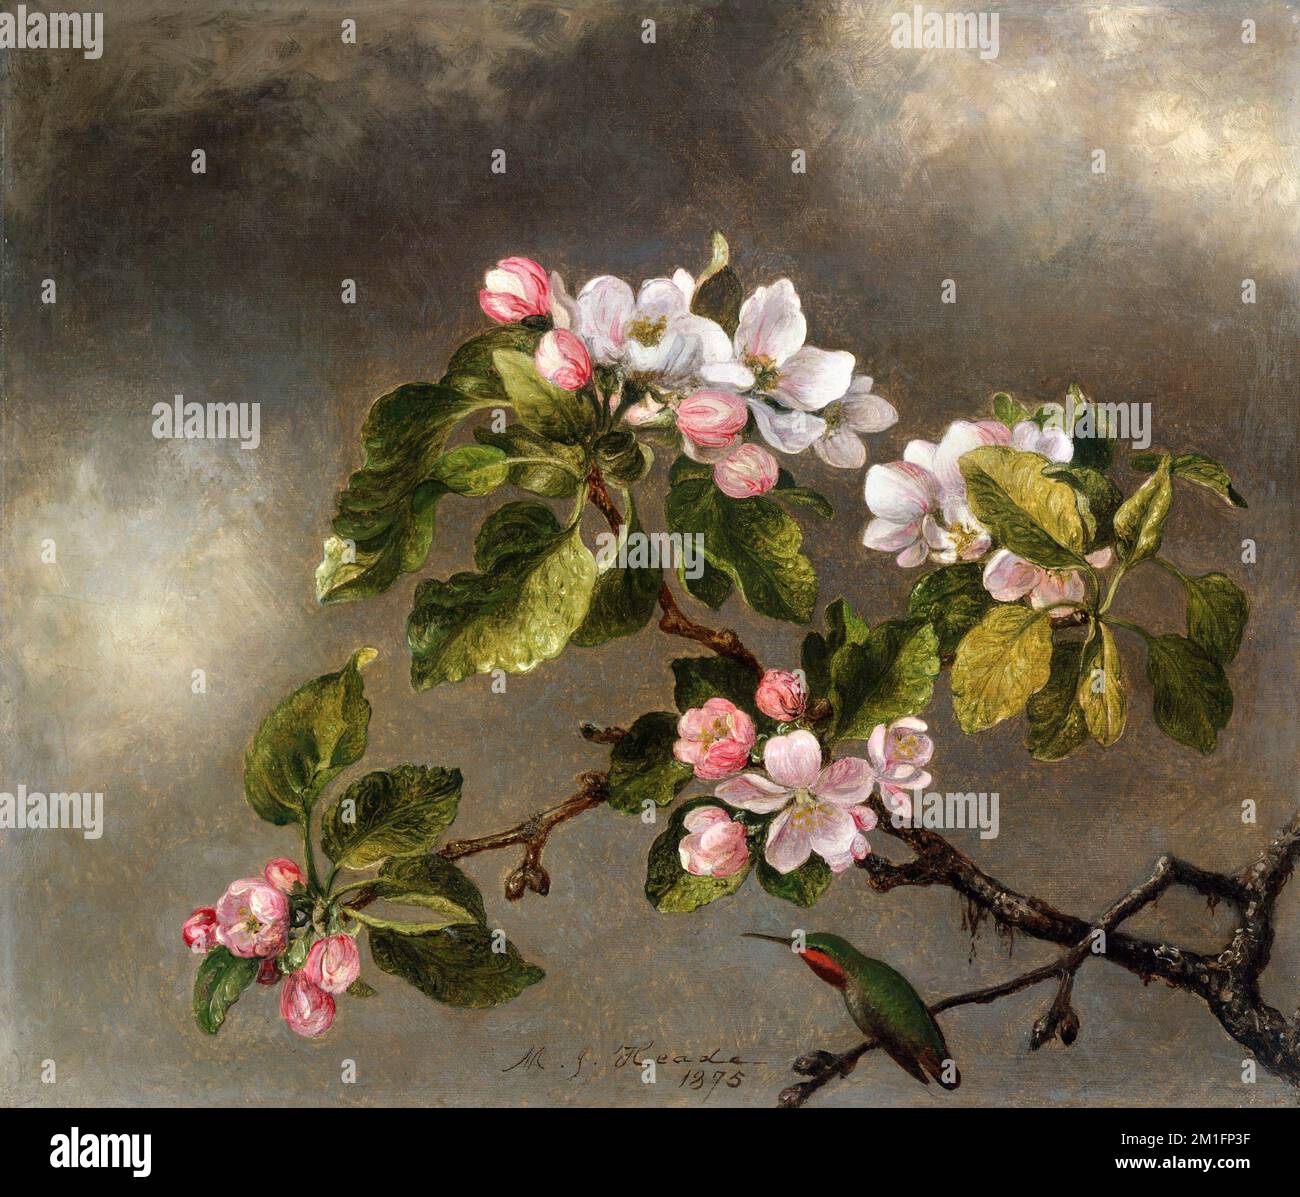 Hummingbird and Apple Blossoms by the American artist, Martin Johnson Heade (1819-1904), oil on canvas, 1875 Stock Photo